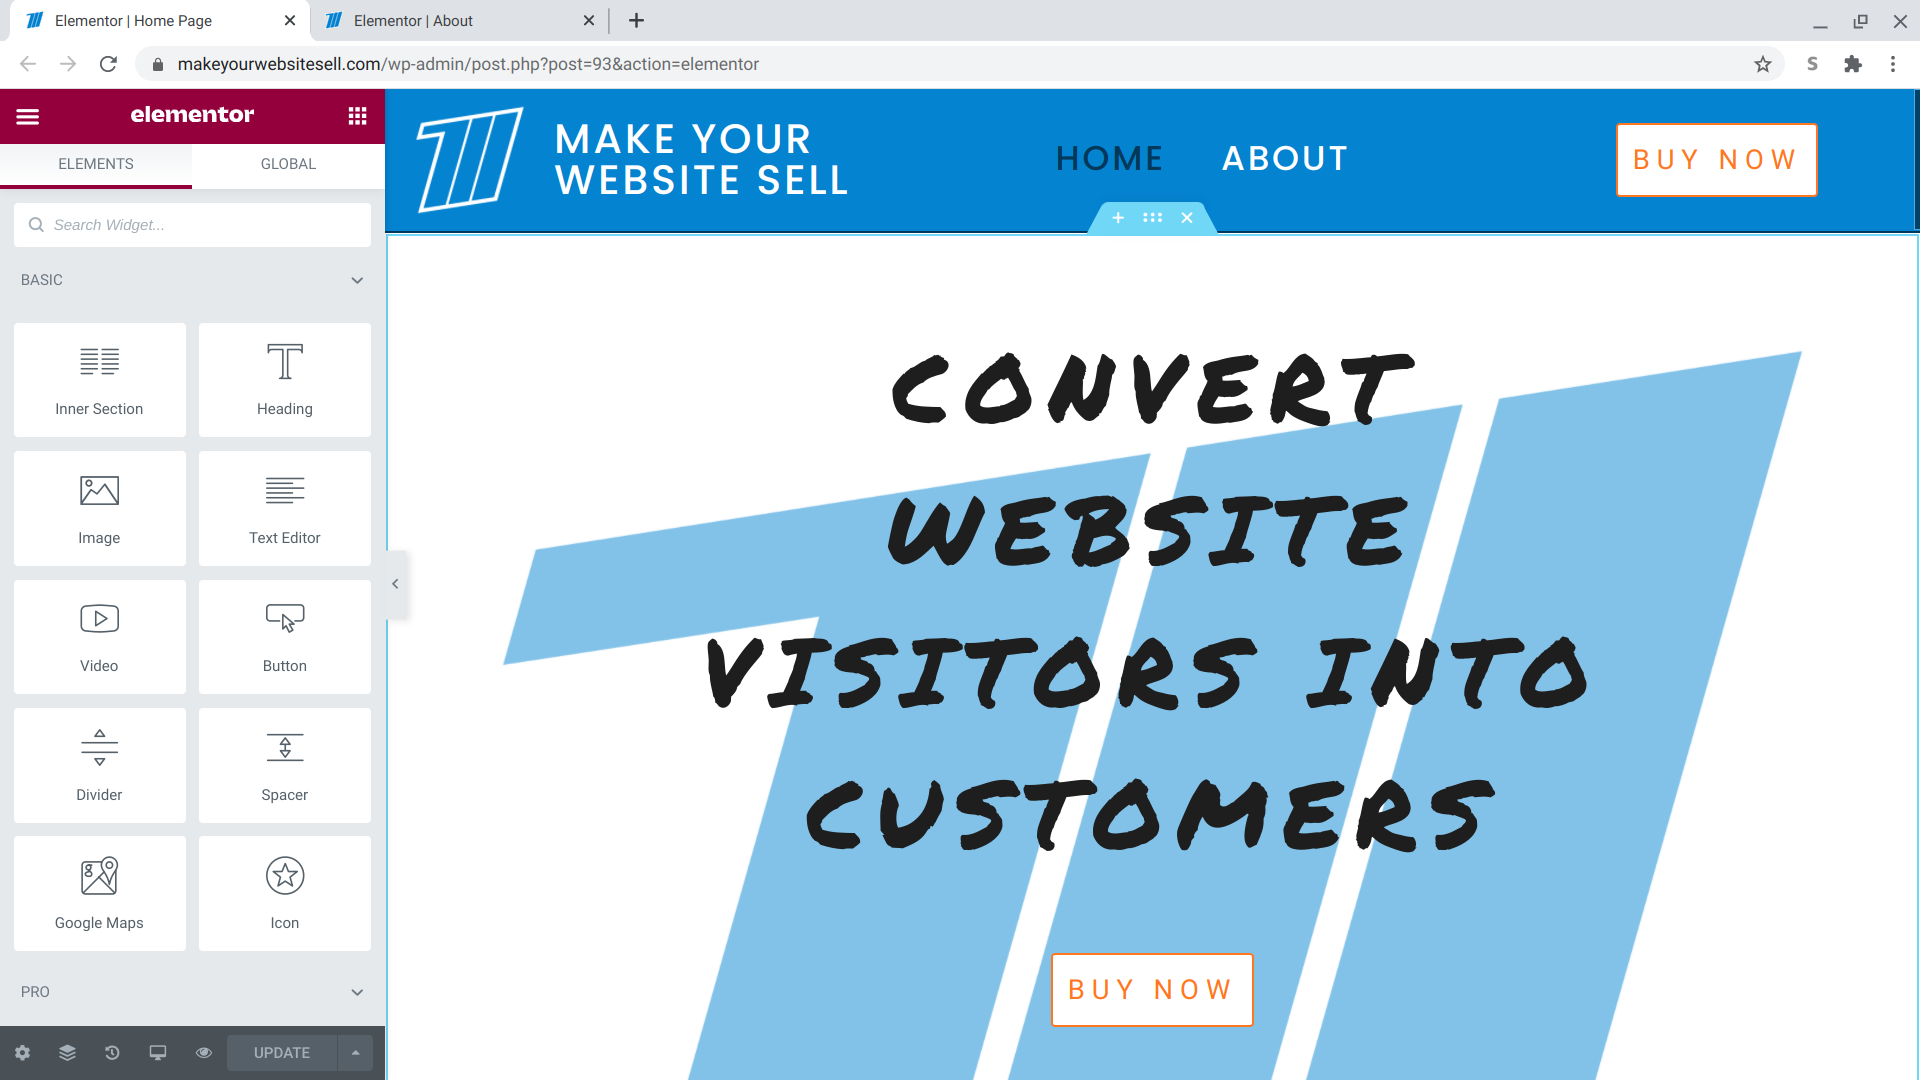 Header and Menu for Make Your Website Sell.